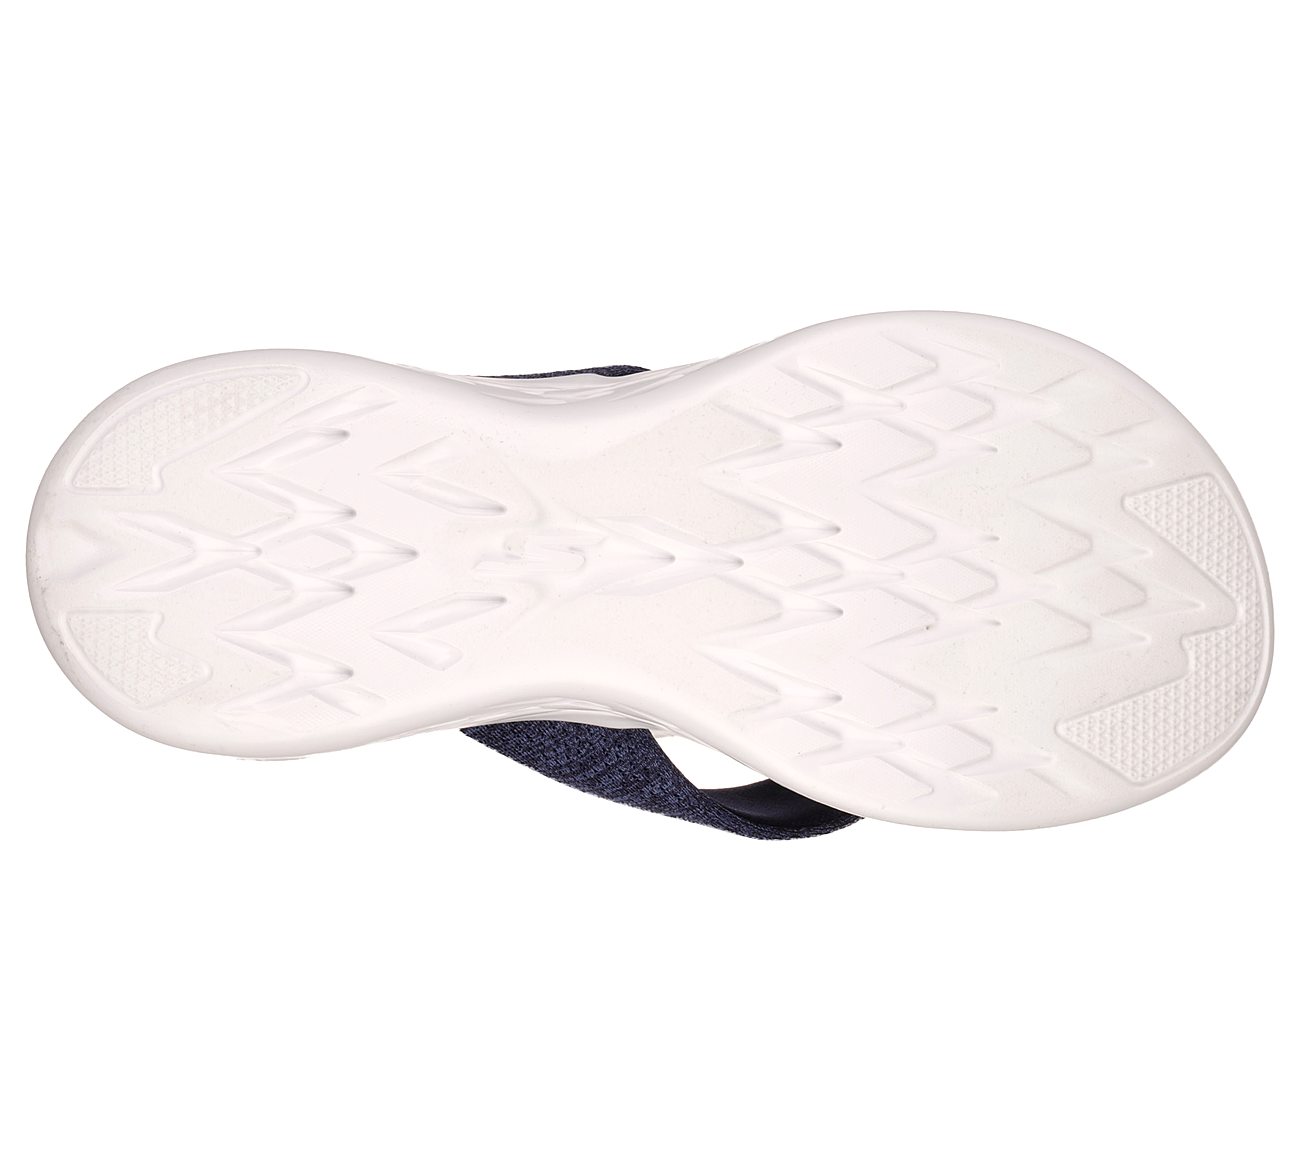 ON-THE-GO 600 - PREFERRED, NAVY/WHITE Footwear Bottom View